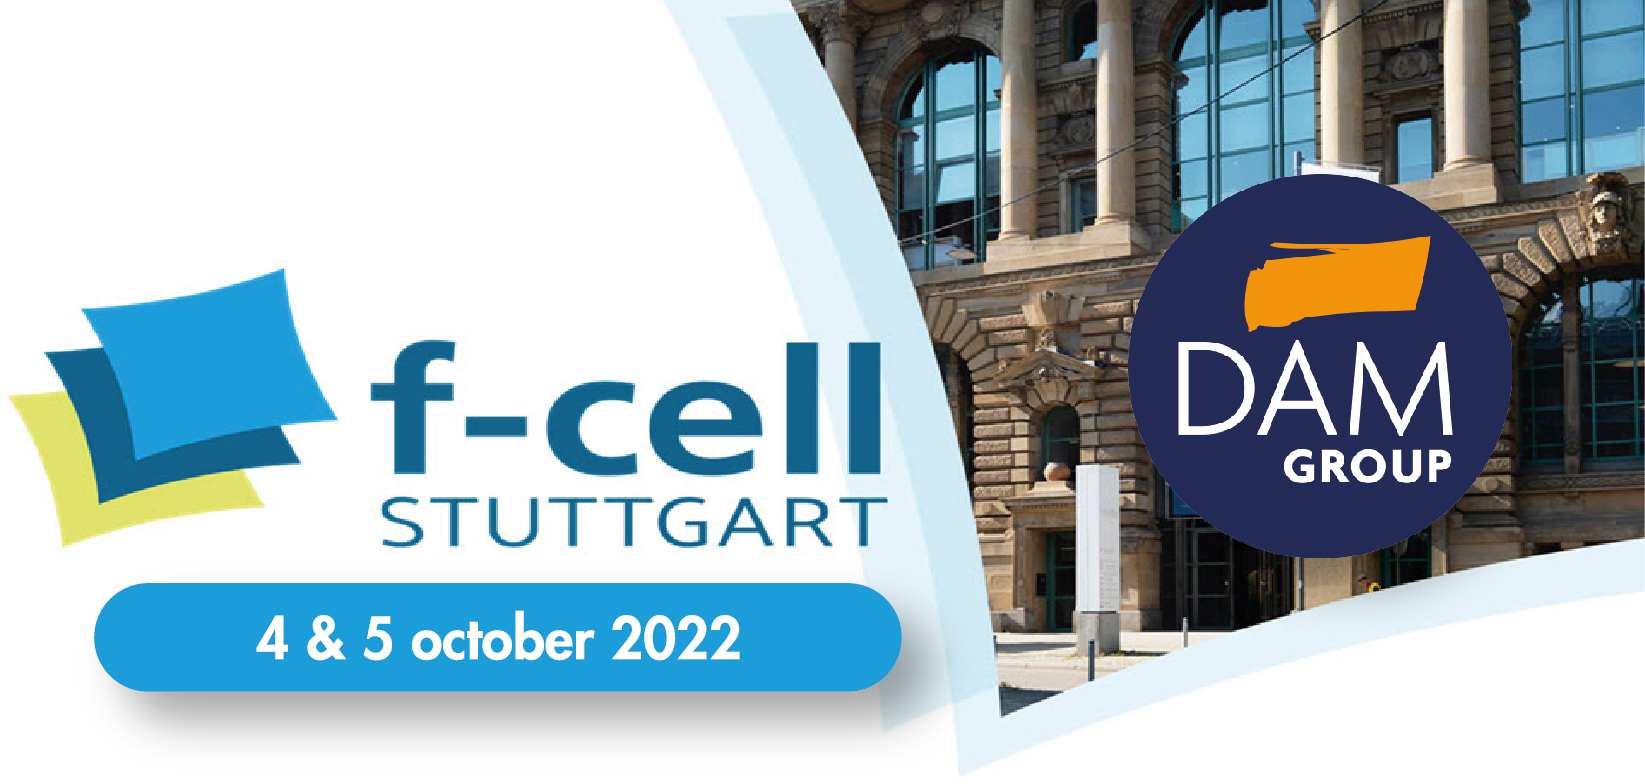 dam group F-cell 2022